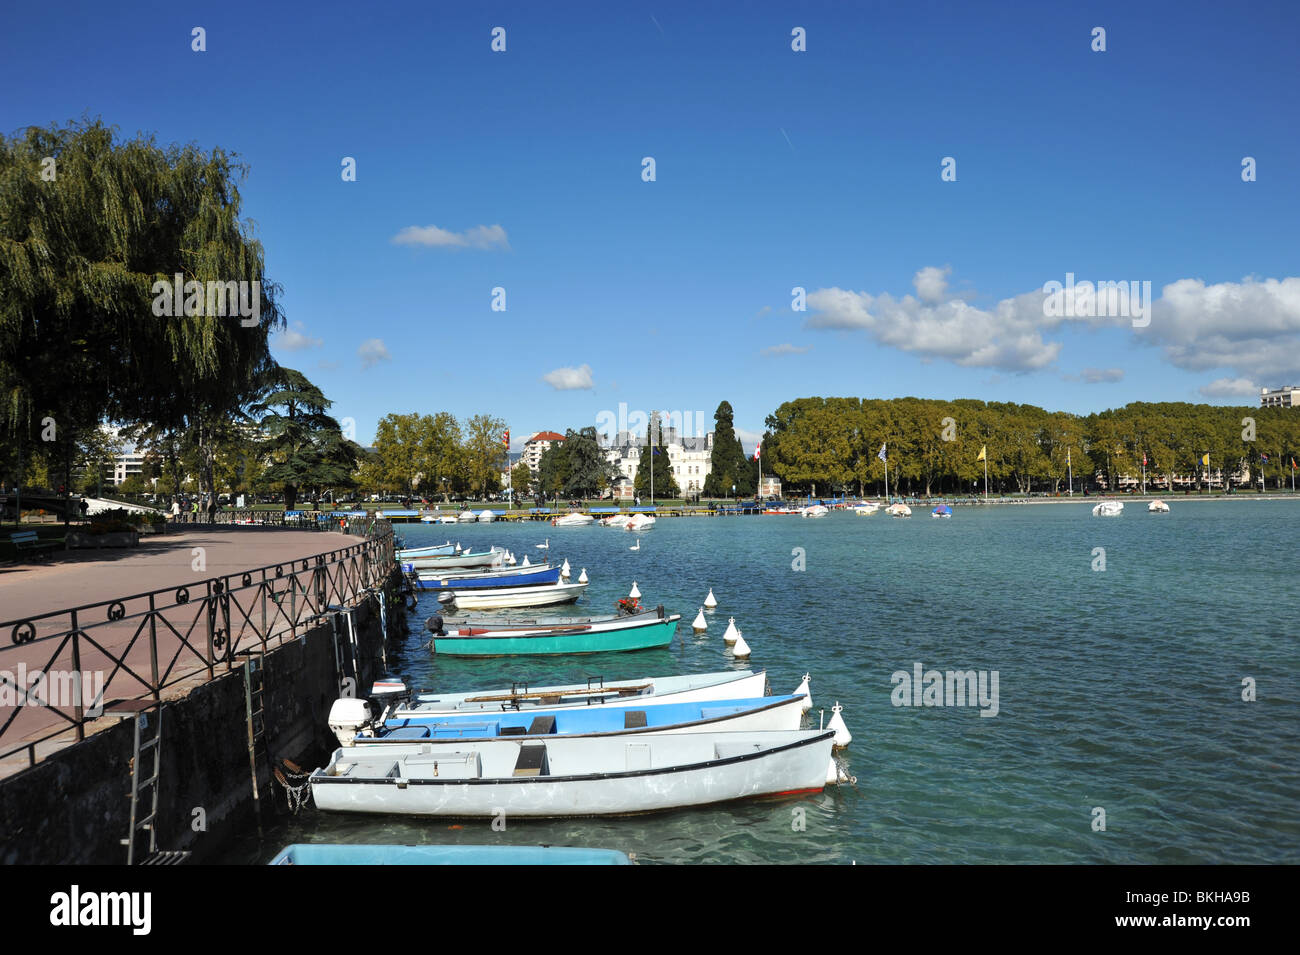 The lake in Annecy in the Haute Savoie, Rhone Alpes region of France Stock Photo